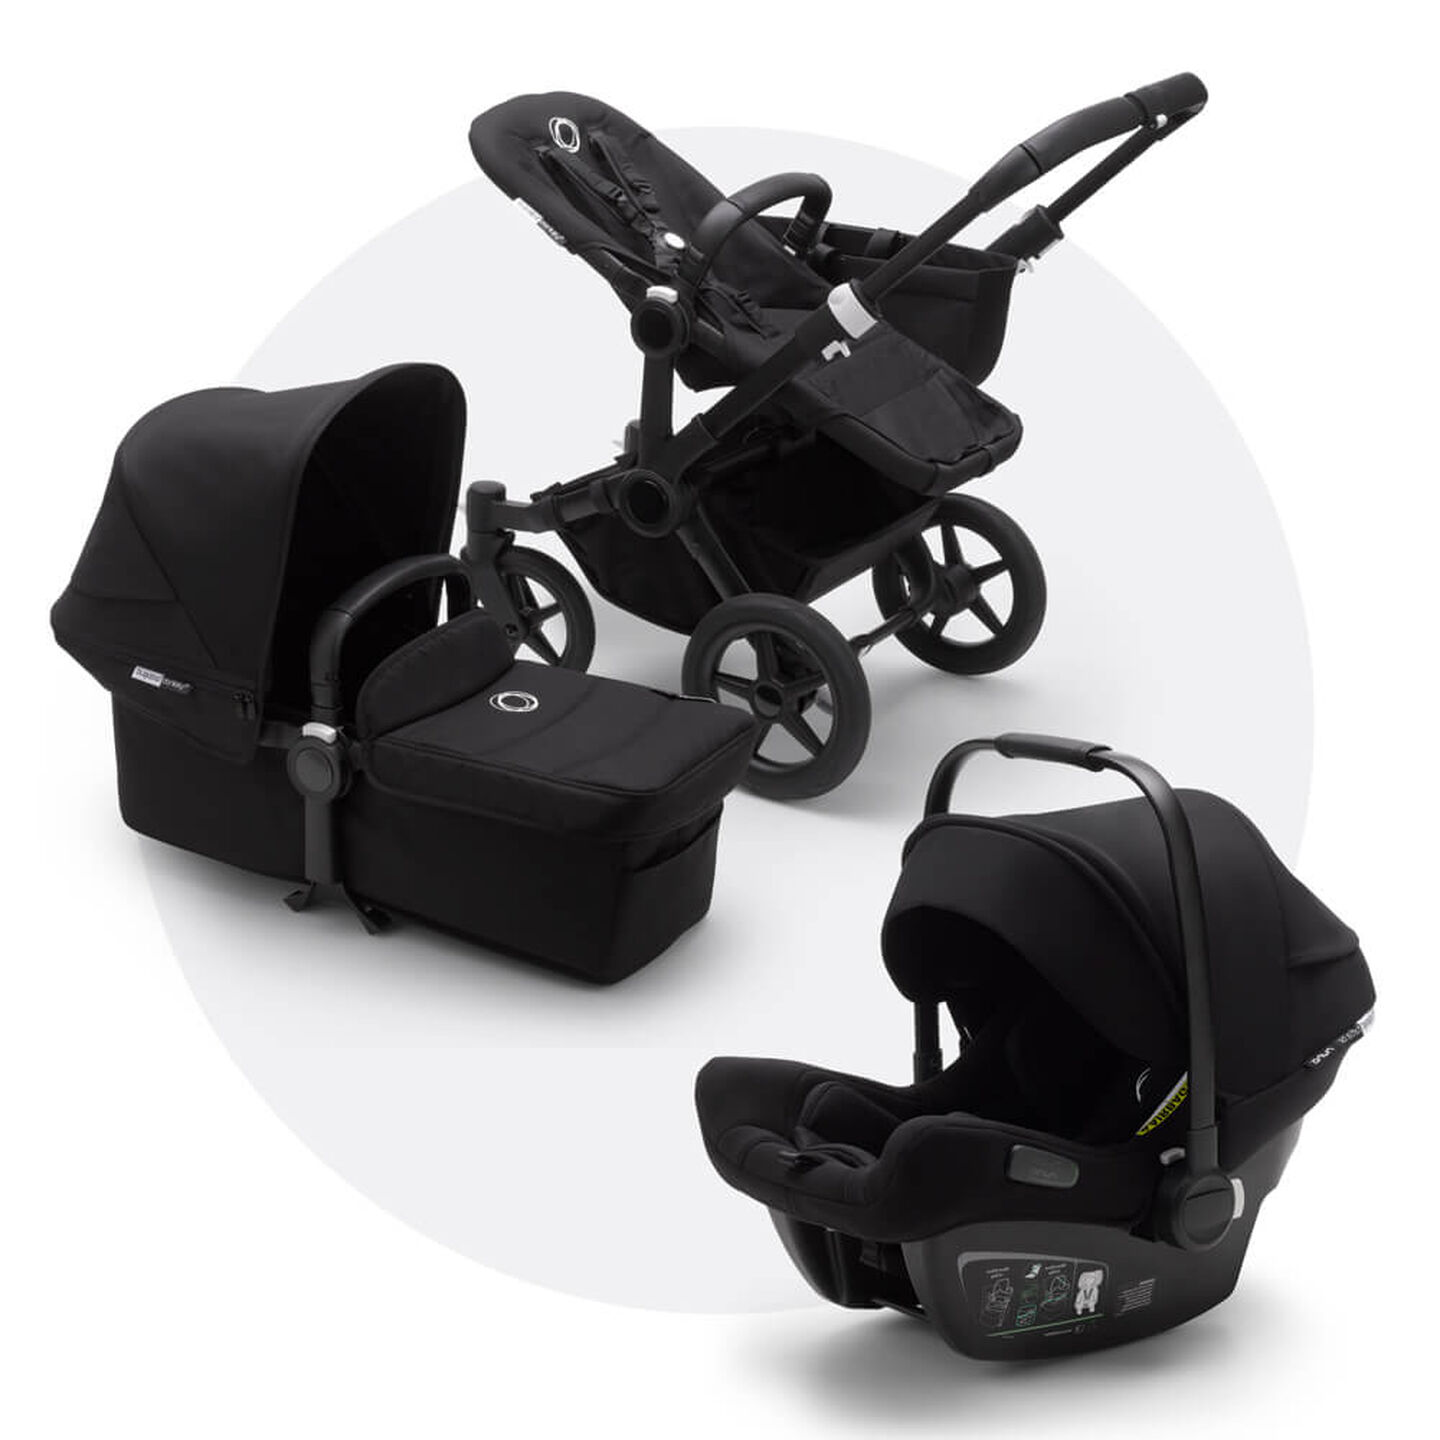 The Bugaboo Fox travel system in black, featuring a pushchair, carrycot and car seat